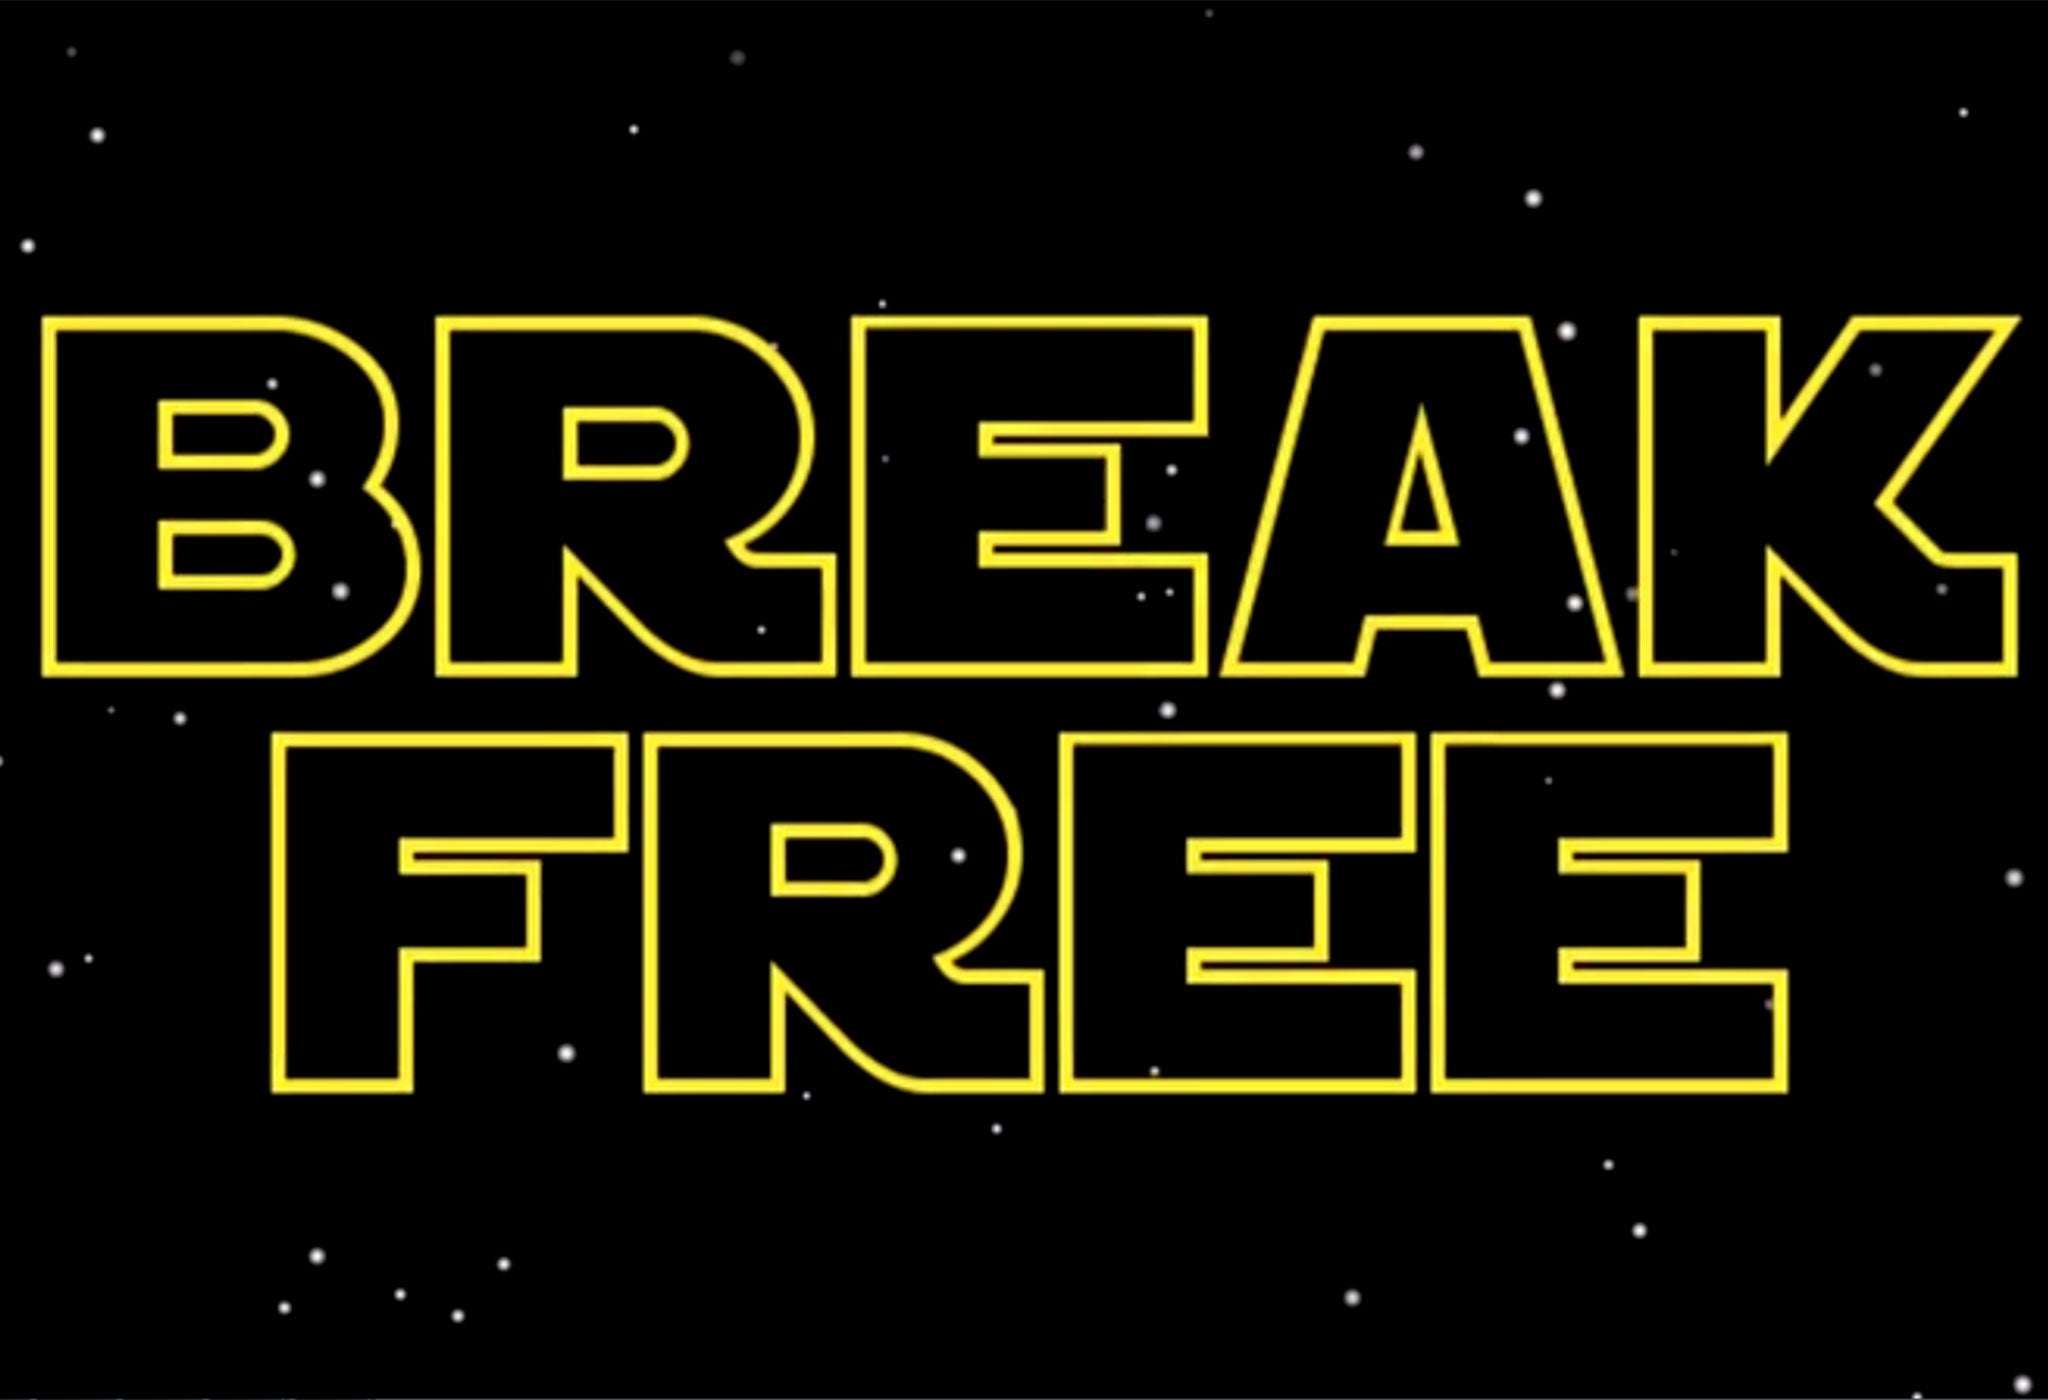 Ariana Grande's 'Break Free' makes use of the iconic Star Wars text